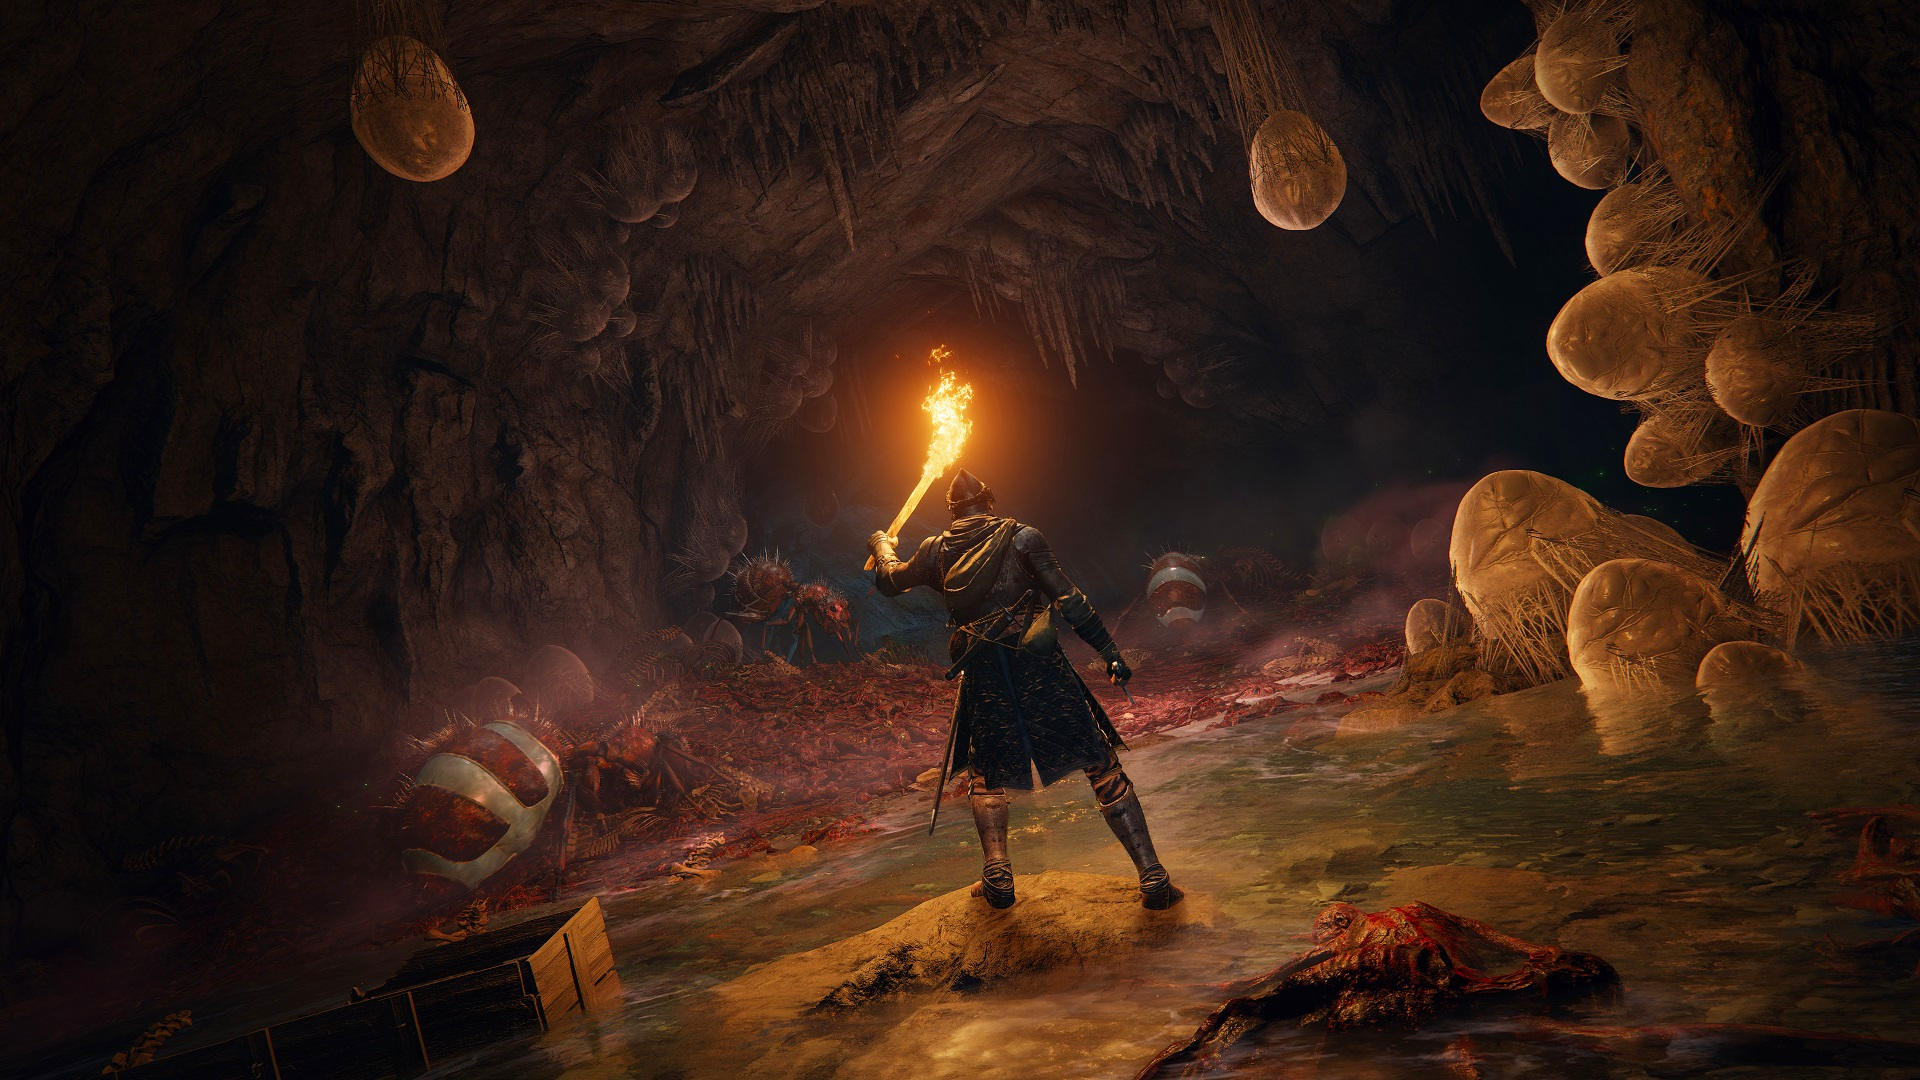 Elden Ring release date: A knight holds up a flaming brand to illuminate a fleshy cavern.